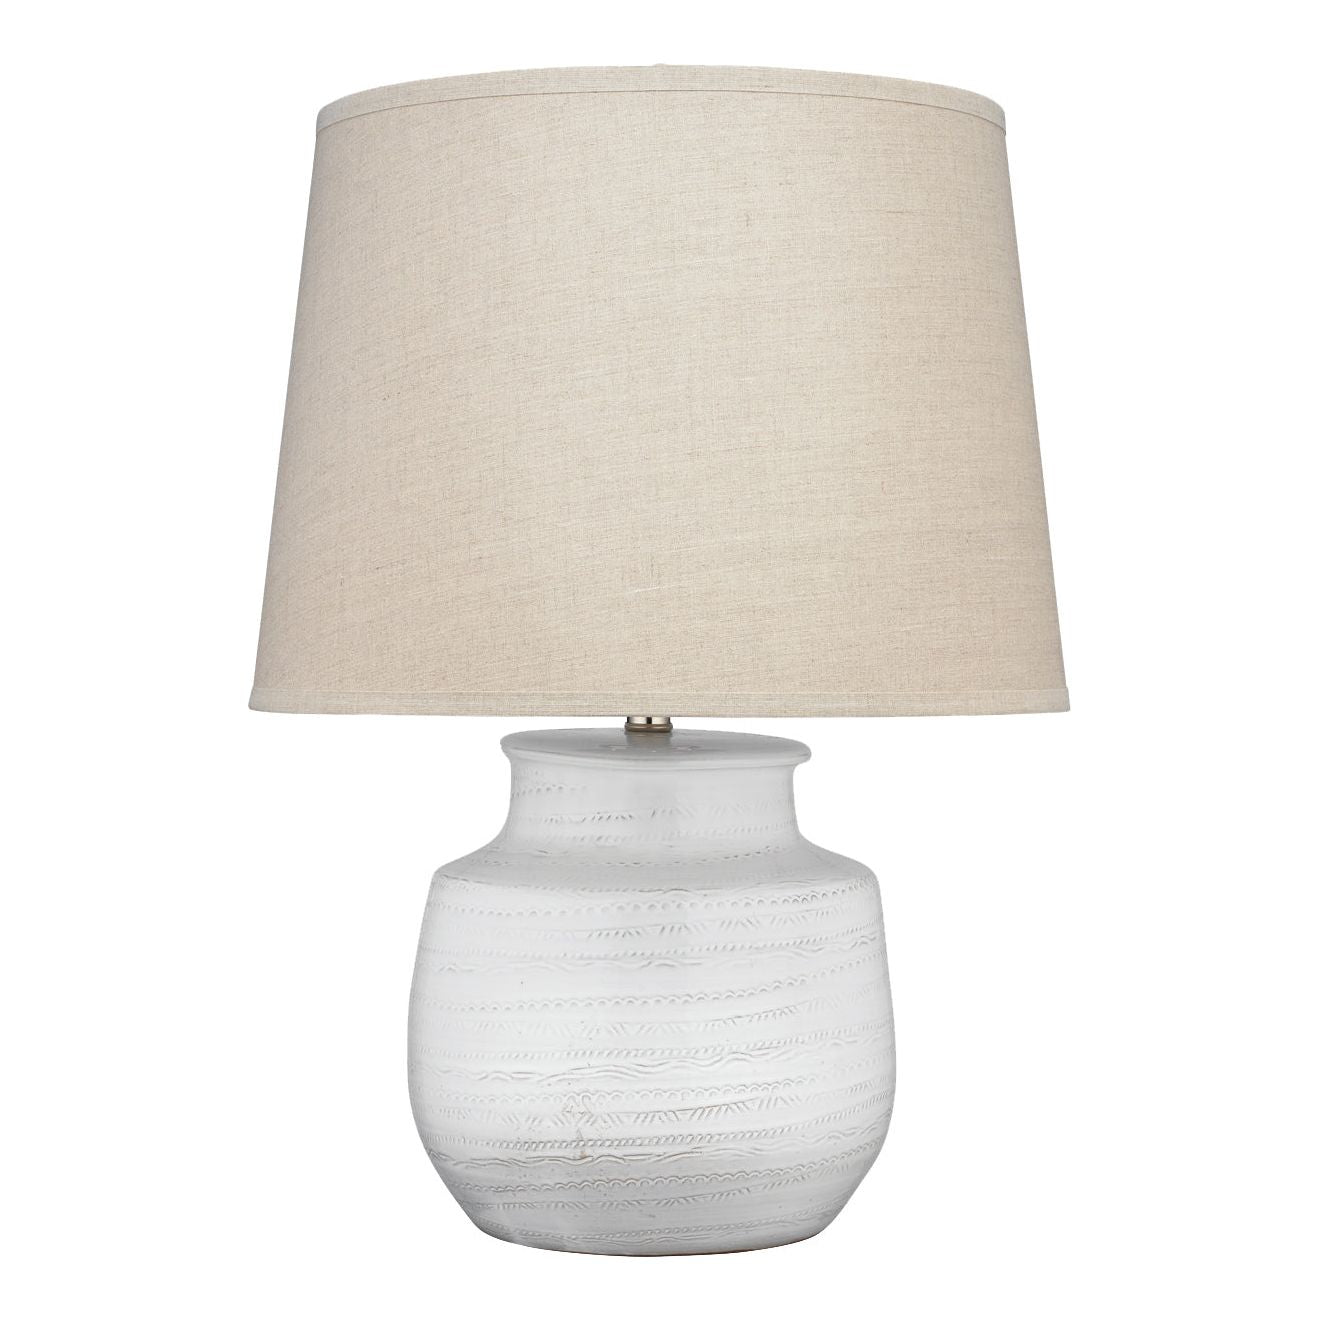 Jamie Young Company - 9TRACESMTLWH - Trace Table Lamp - Trace - White